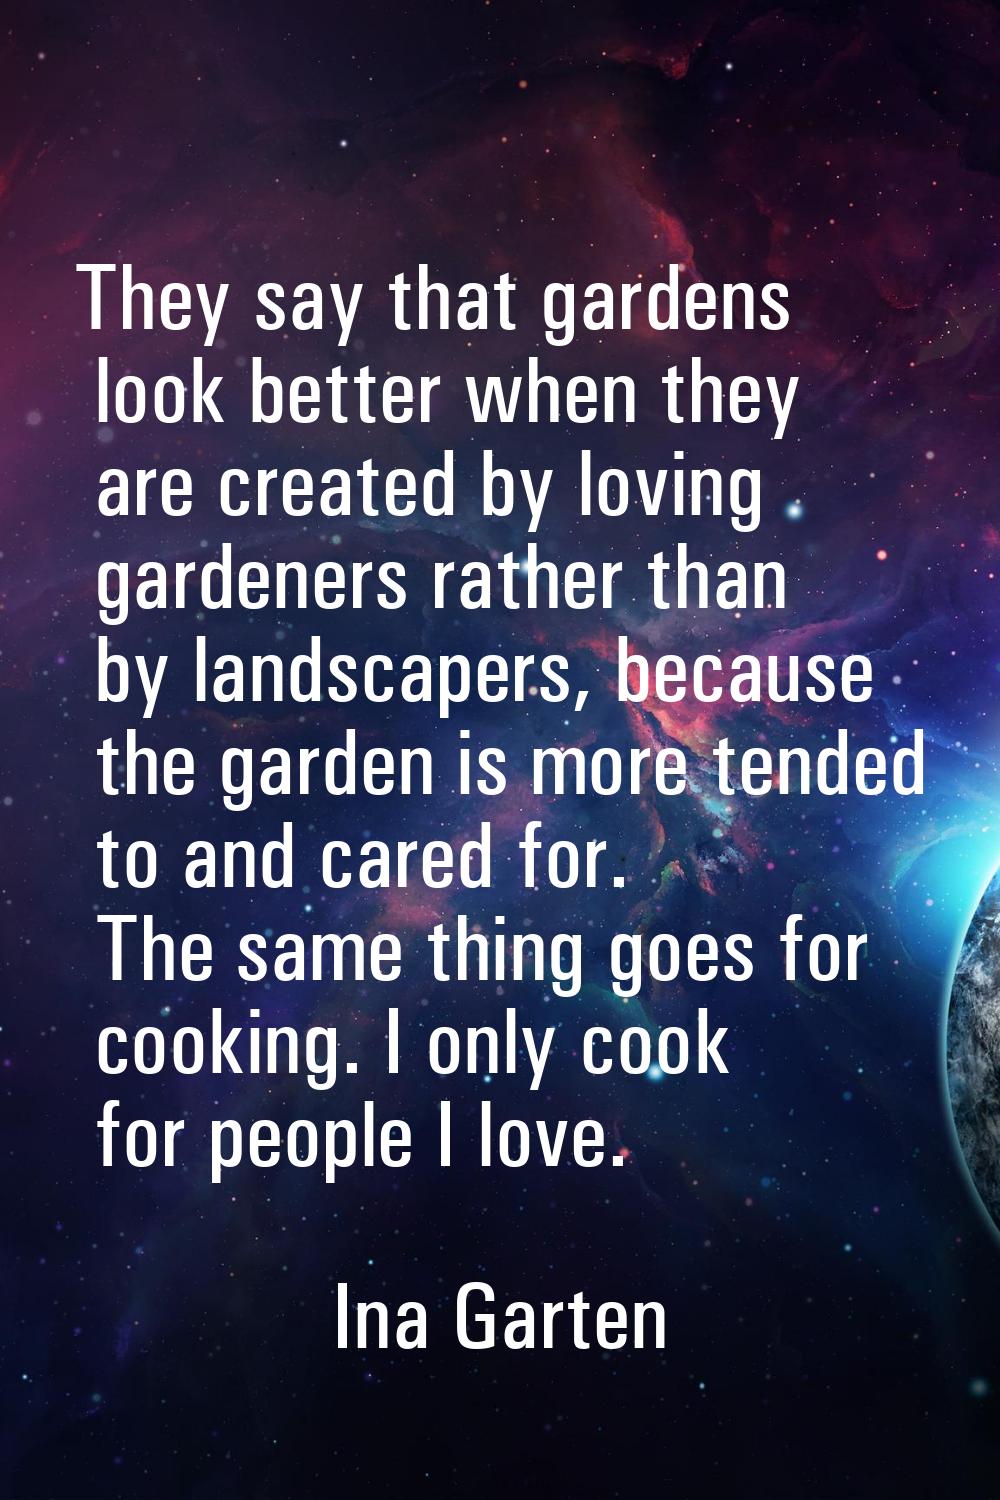 They say that gardens look better when they are created by loving gardeners rather than by landscap